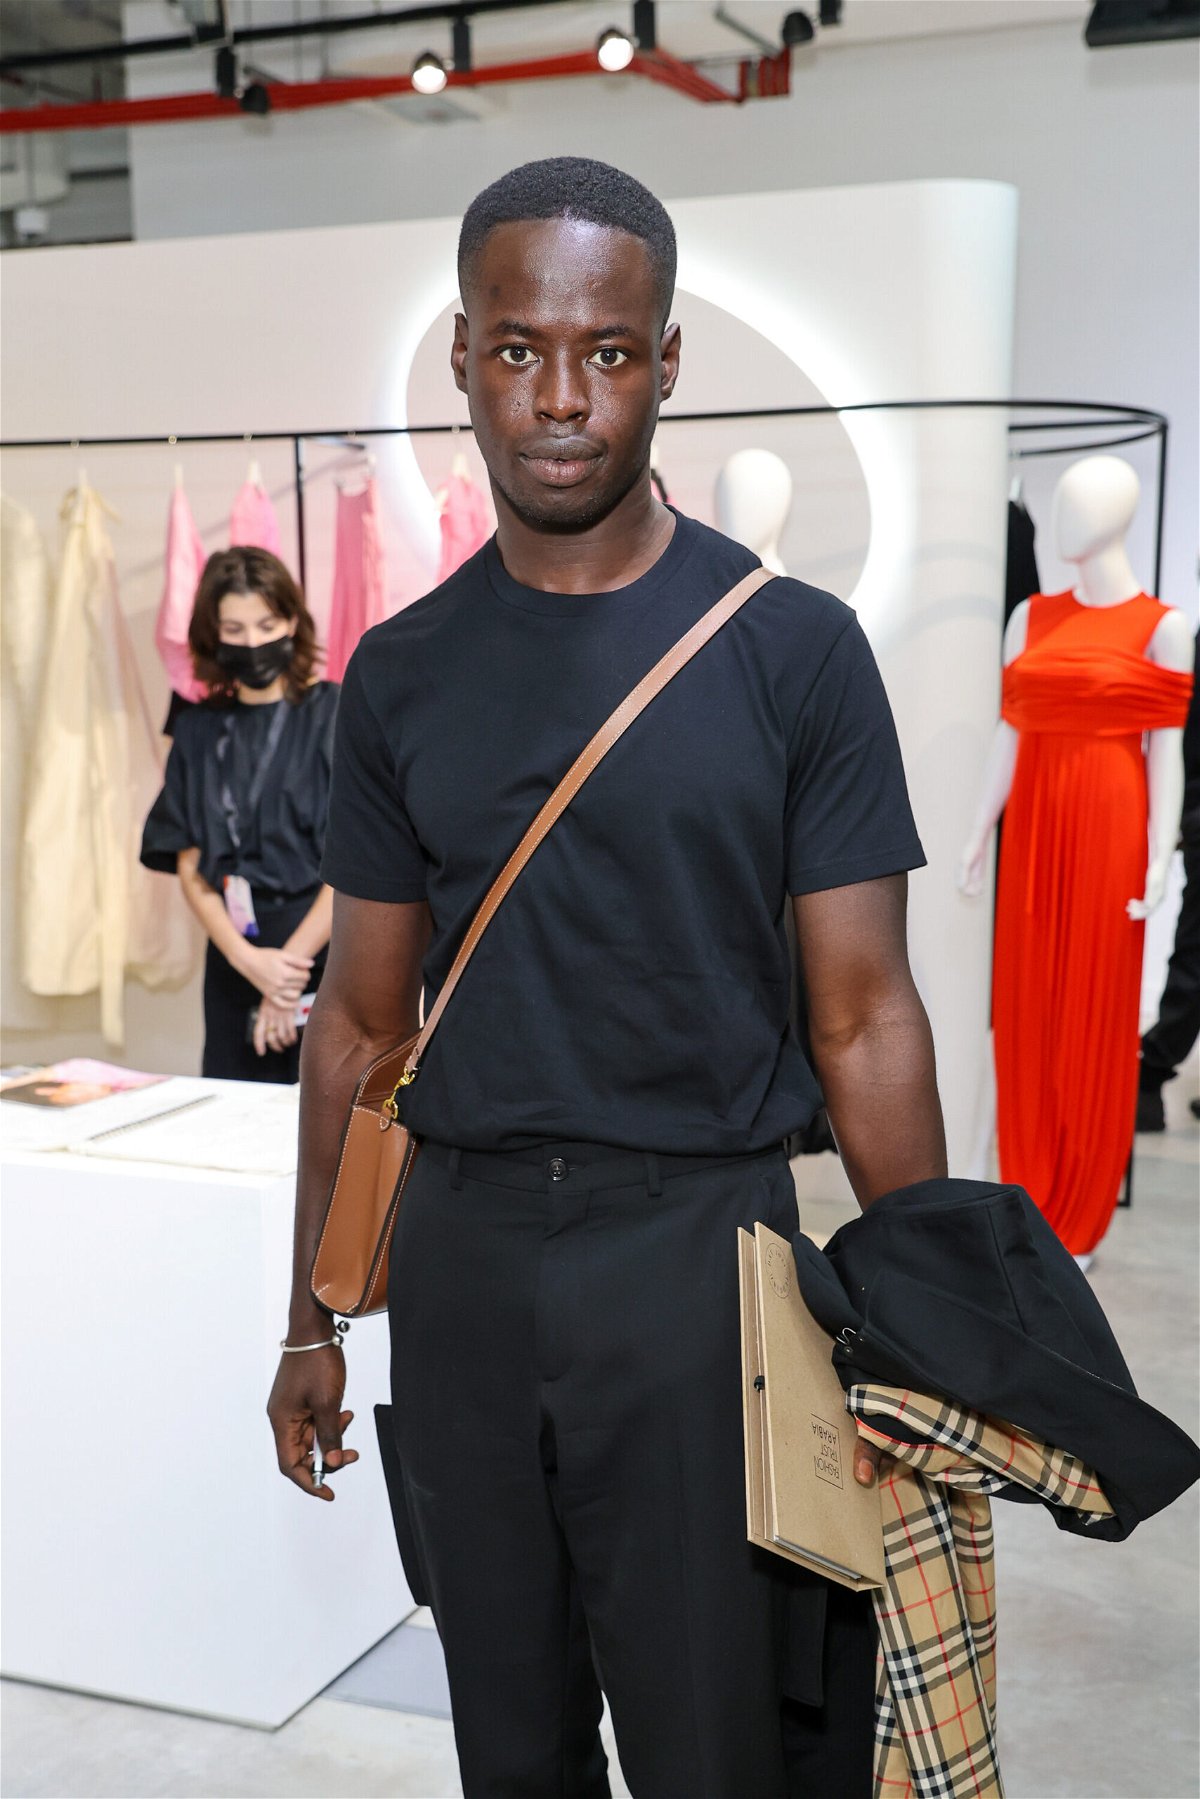 <i>David M. Benett/Getty</i><br/>Louis Vuitton has unveiled the final collection by its late artistic director of menswear